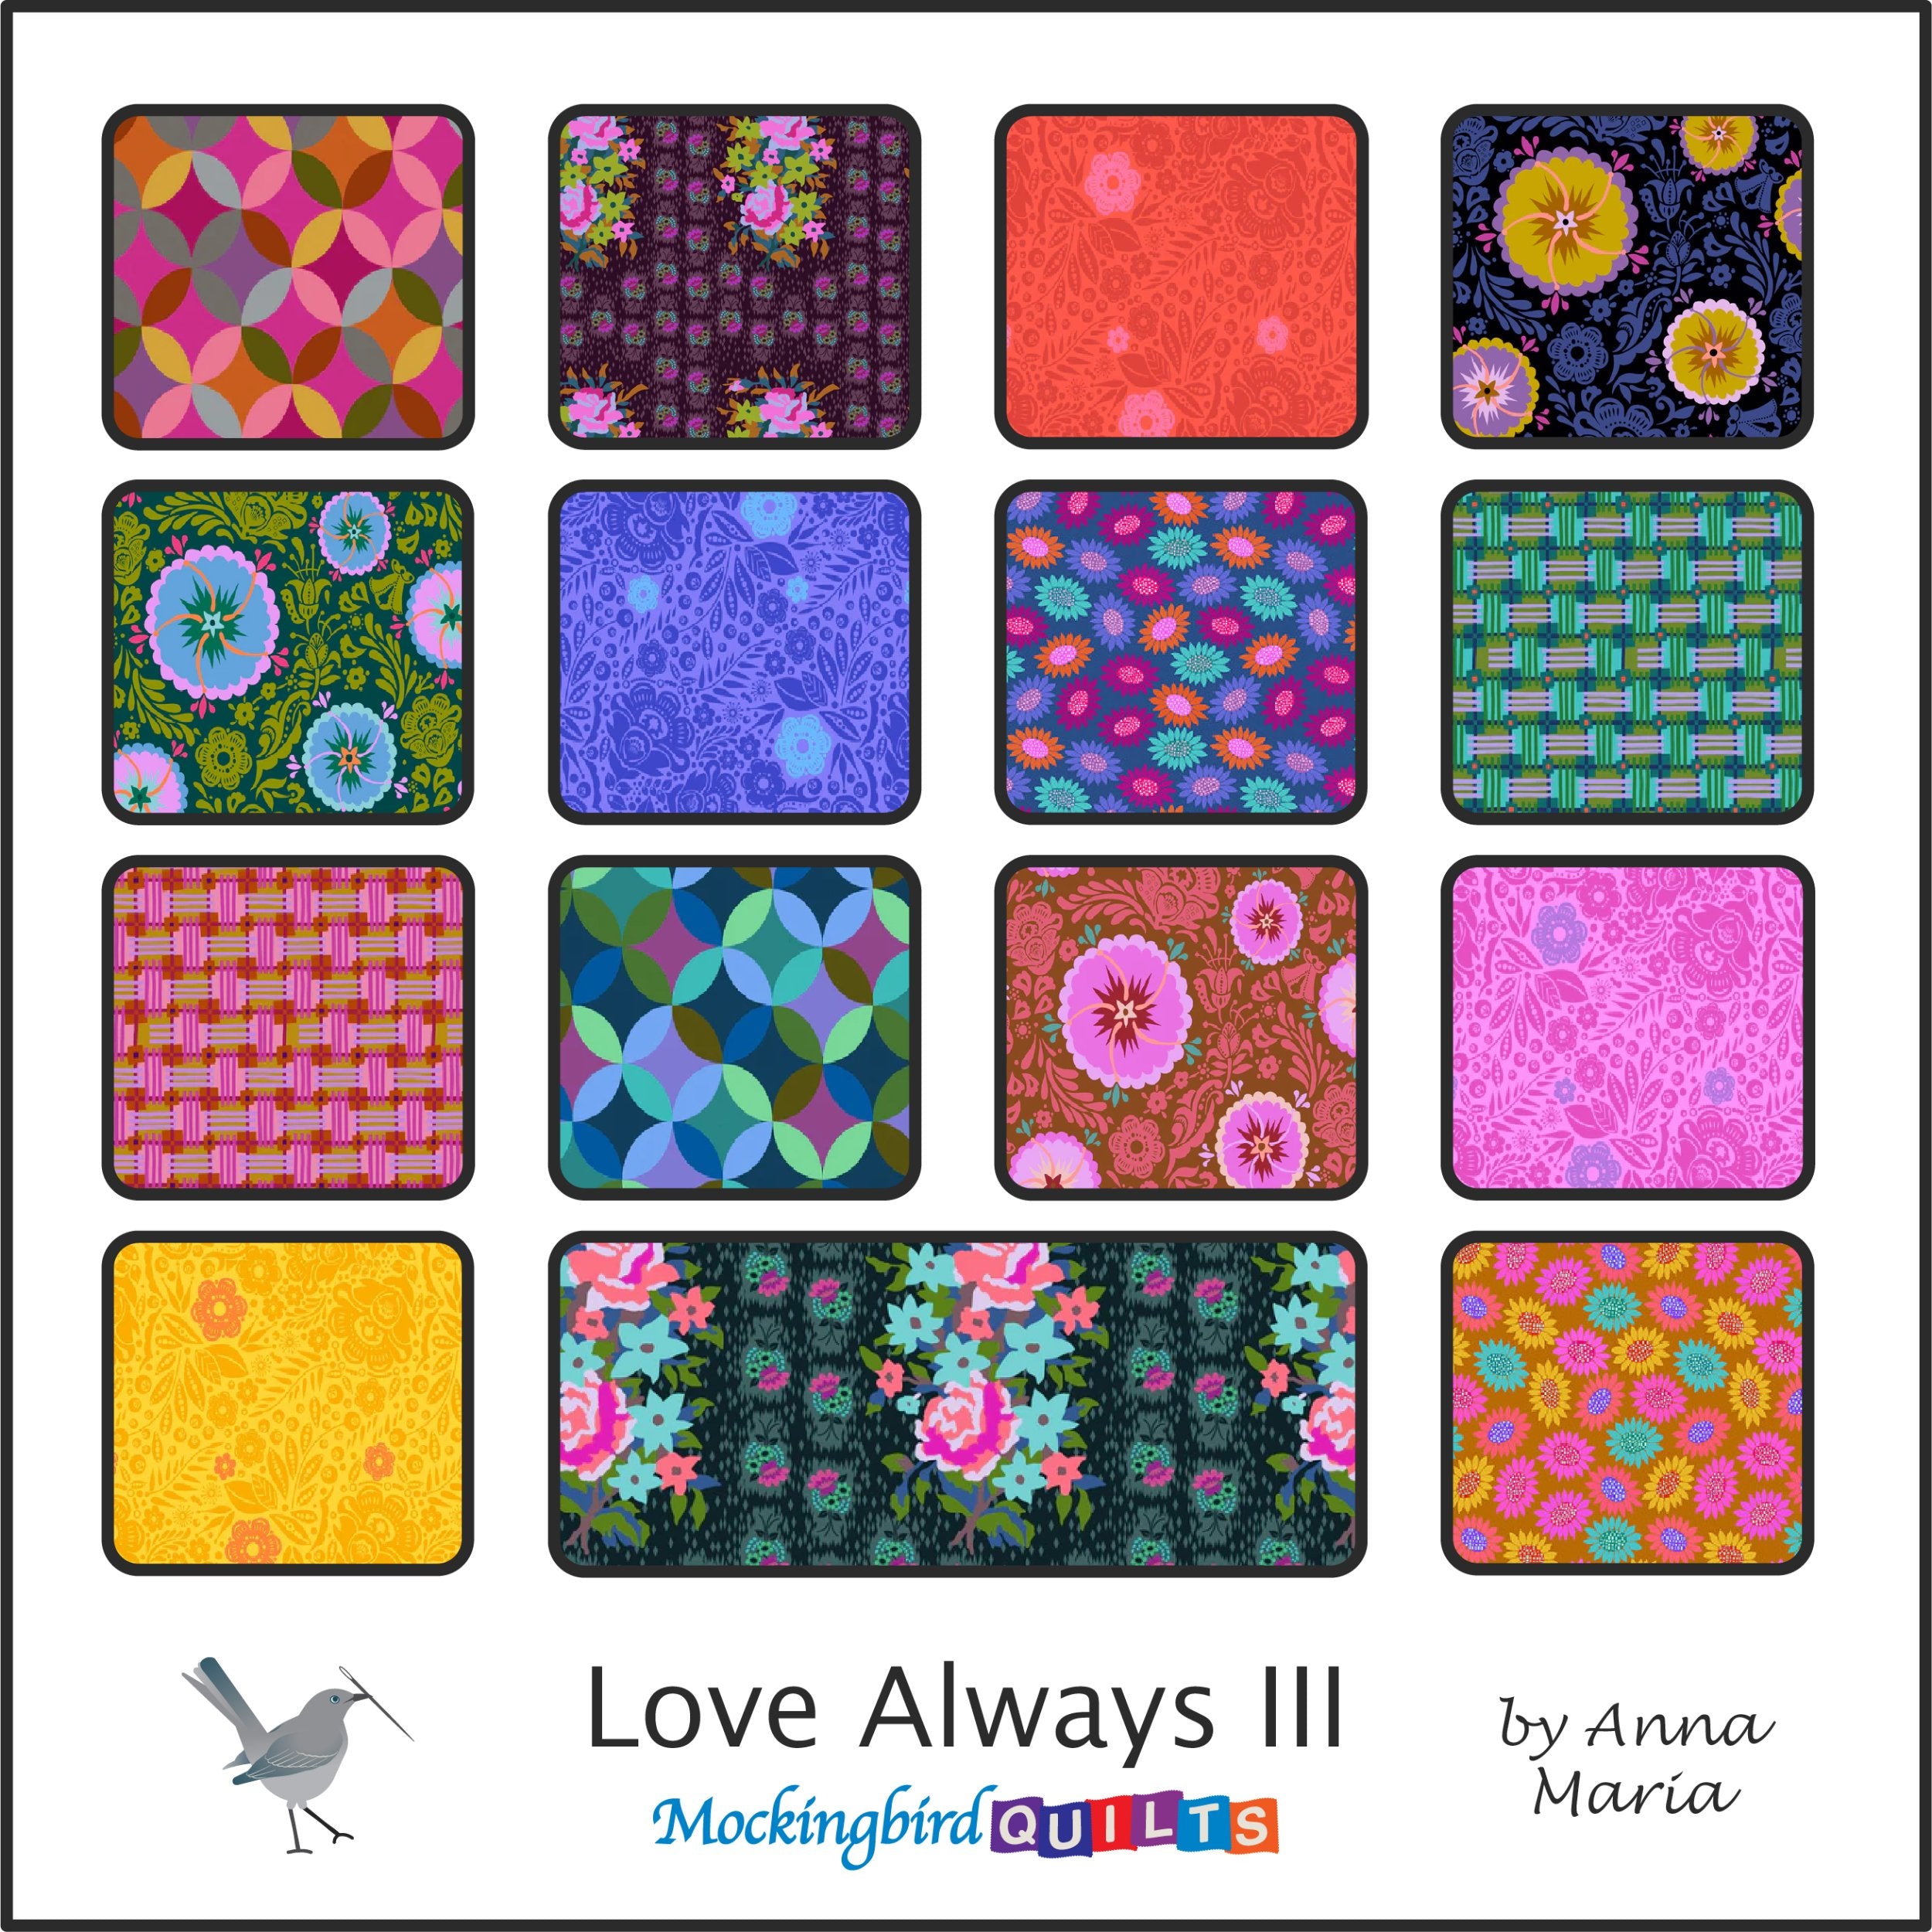 The image shows 15 fabric swatches for the fabric line “Love Always III” by Anna Maria. The swatches are in bold, vibrant colors with equally bold patterns.